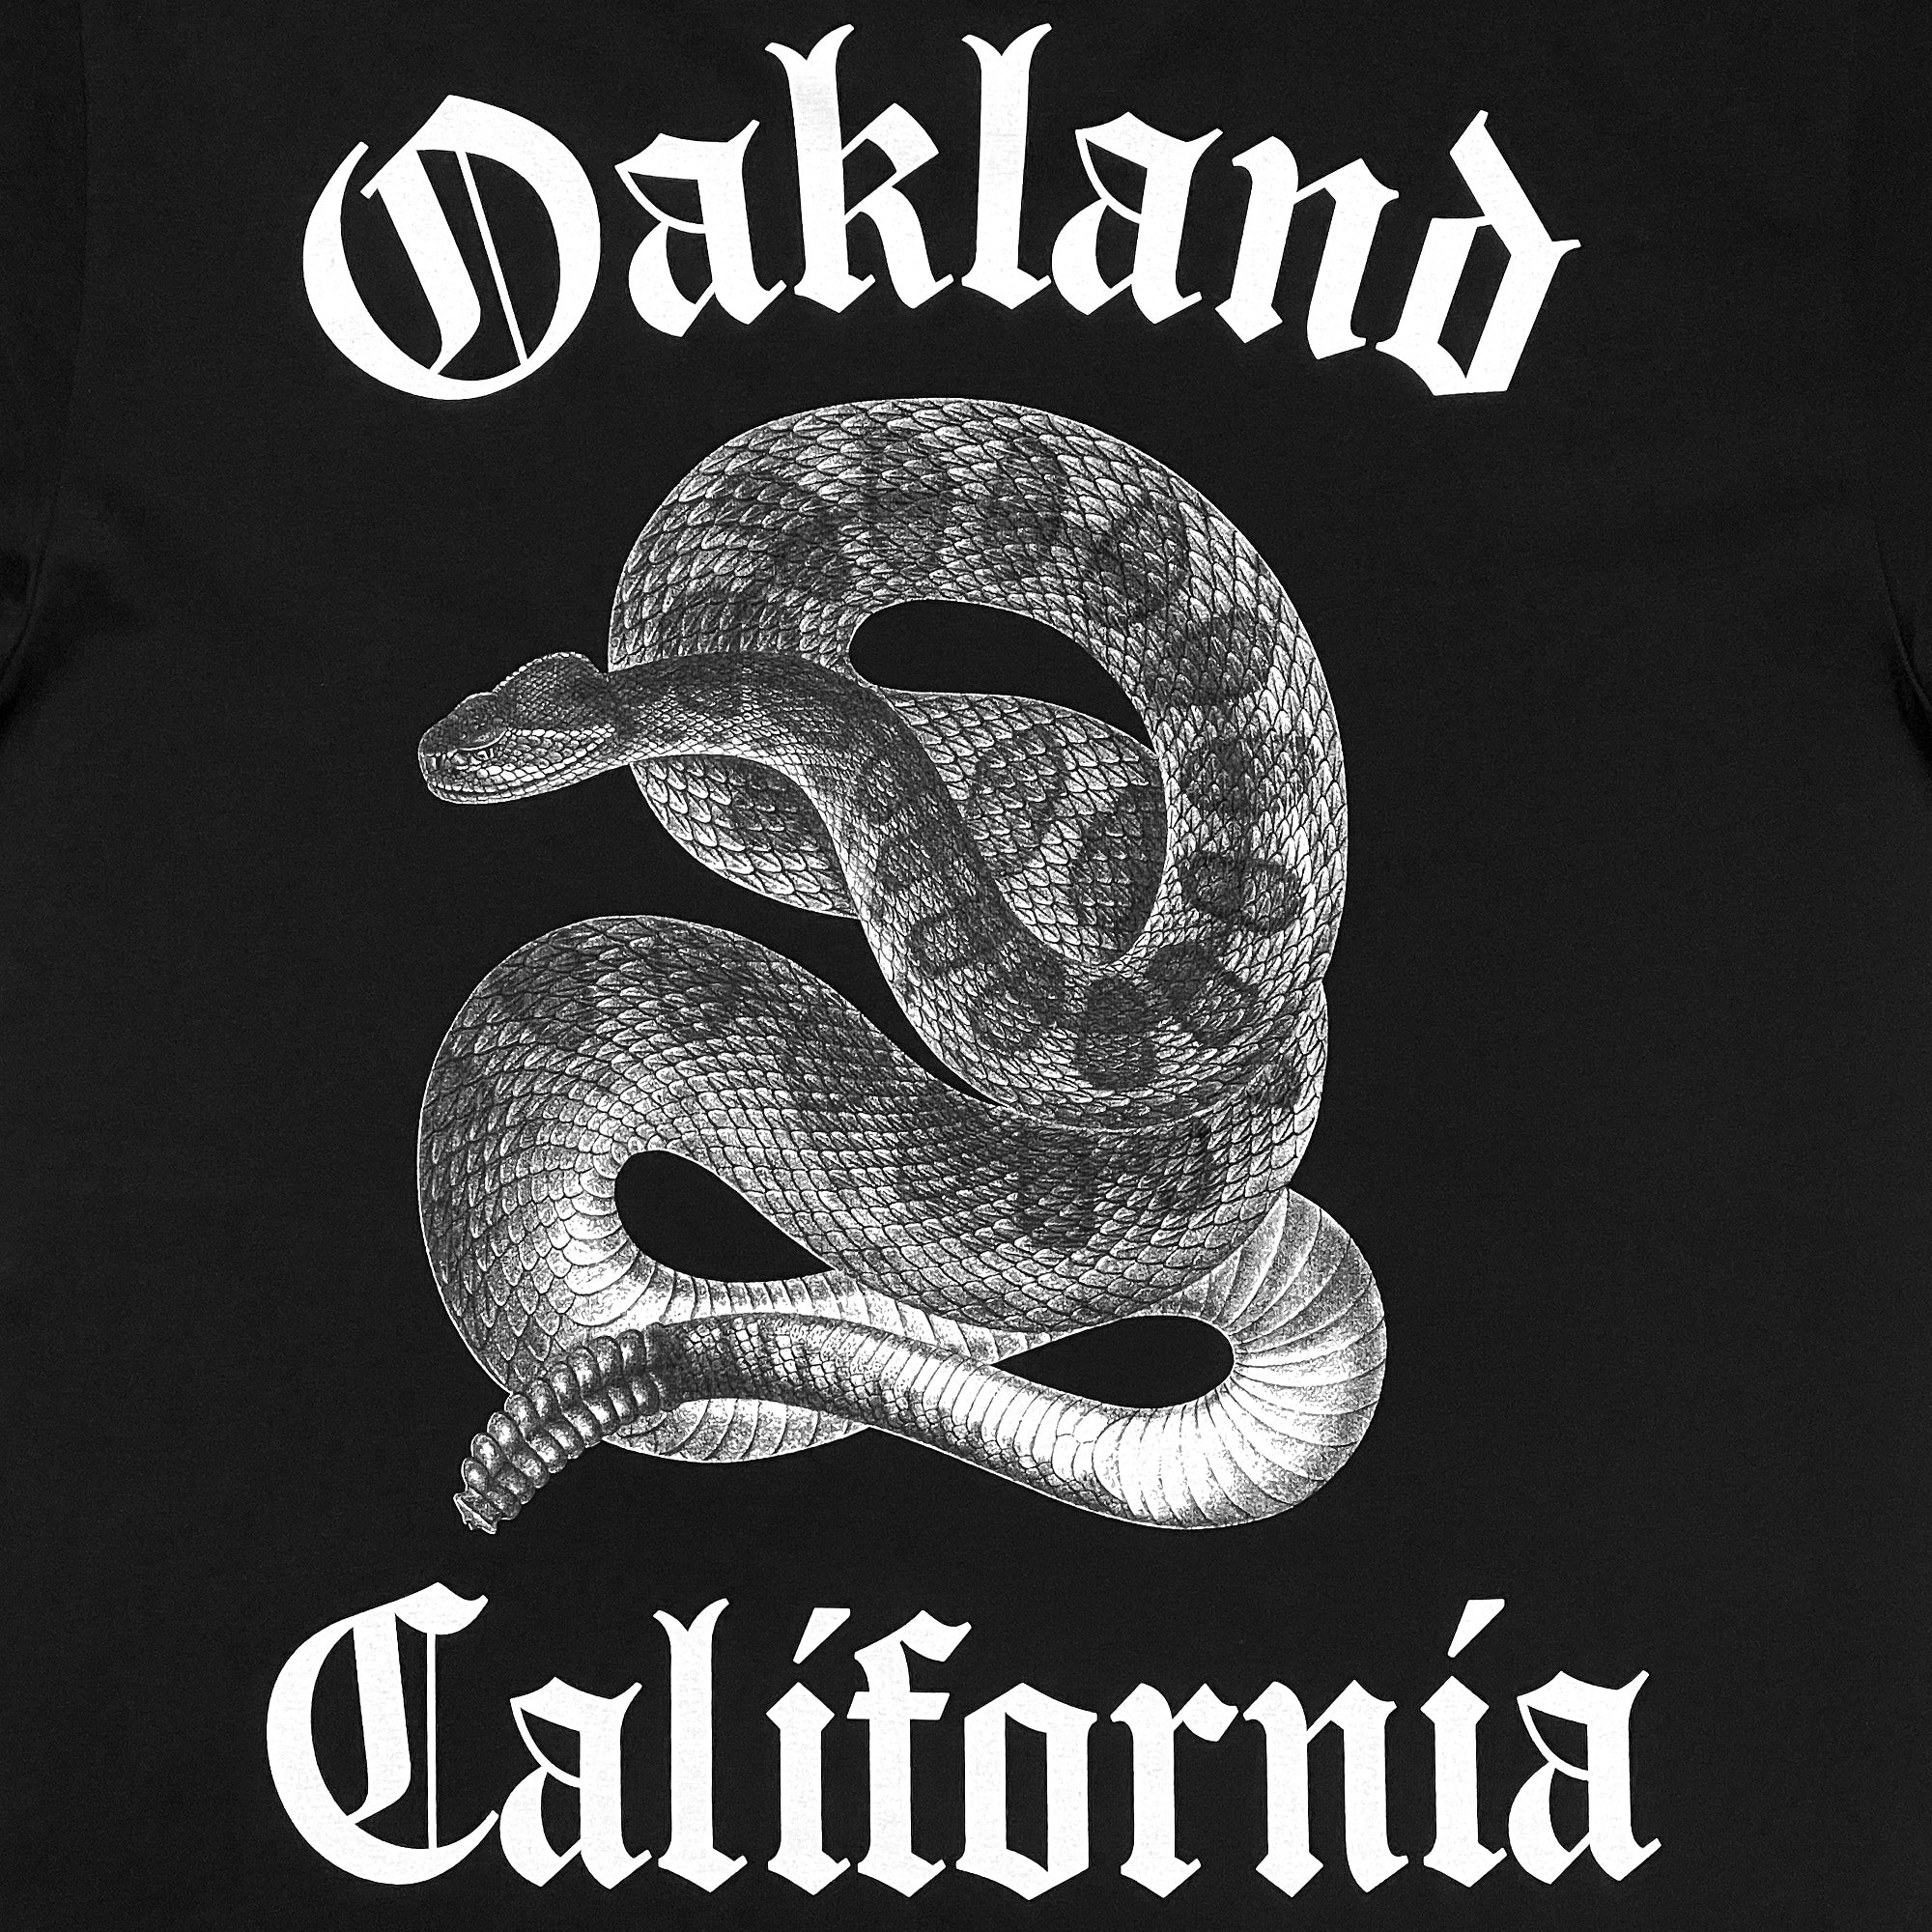 Detailed back view of black pullover hoodie with Oakland California text and snake.